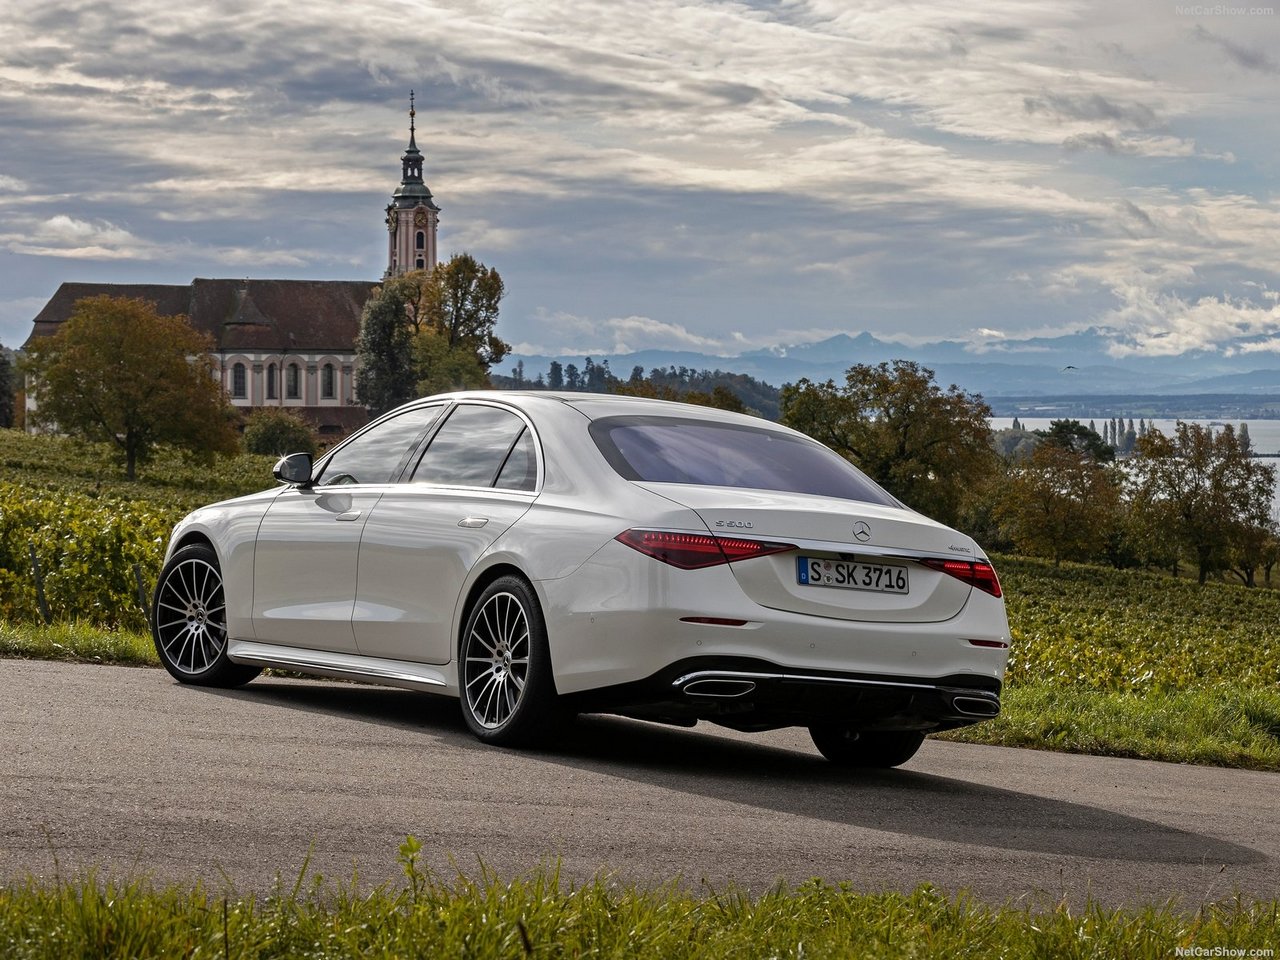 The New S-Class